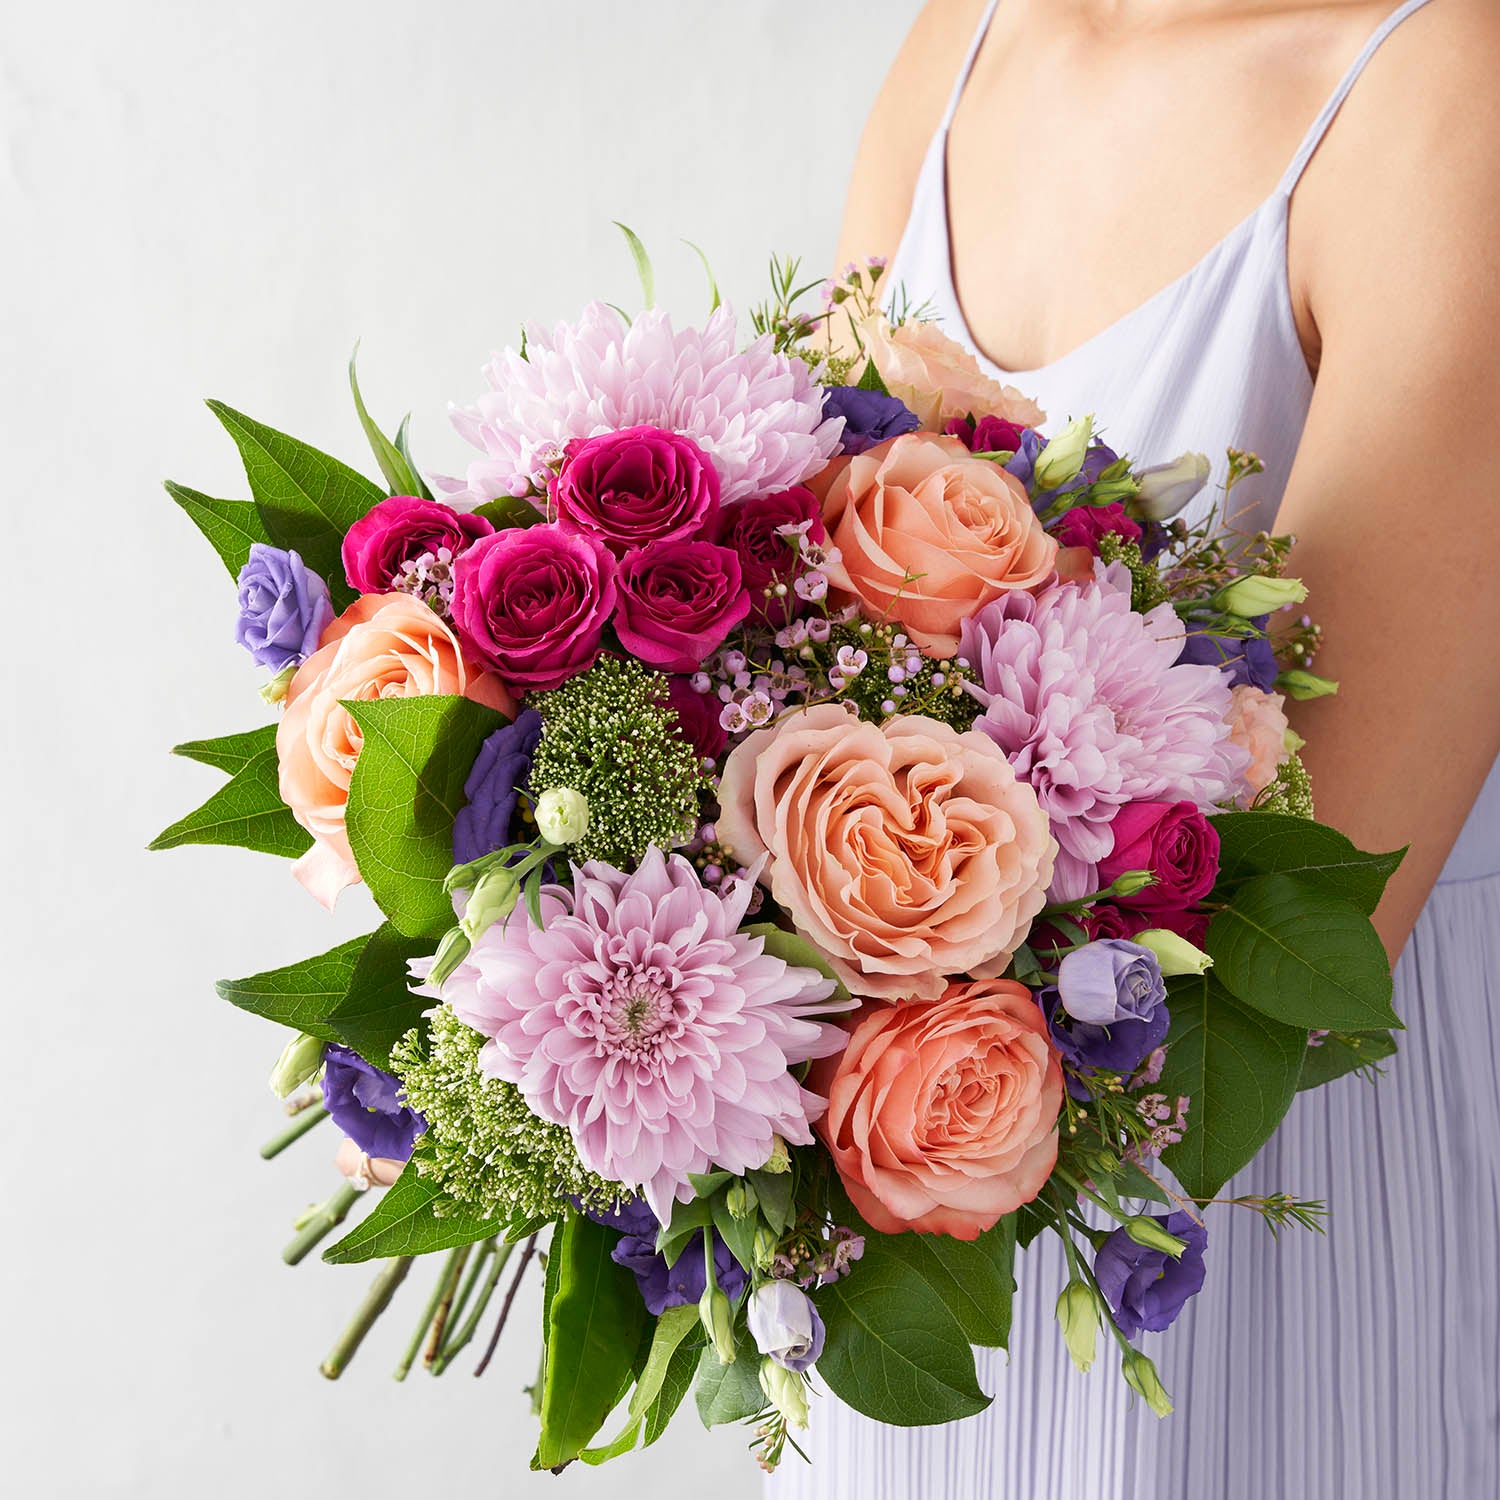 Woman in lavender dress holding bouquet of lavender chrysanthemums, peach roses, fuchsia spray roses and purple lisianthus.